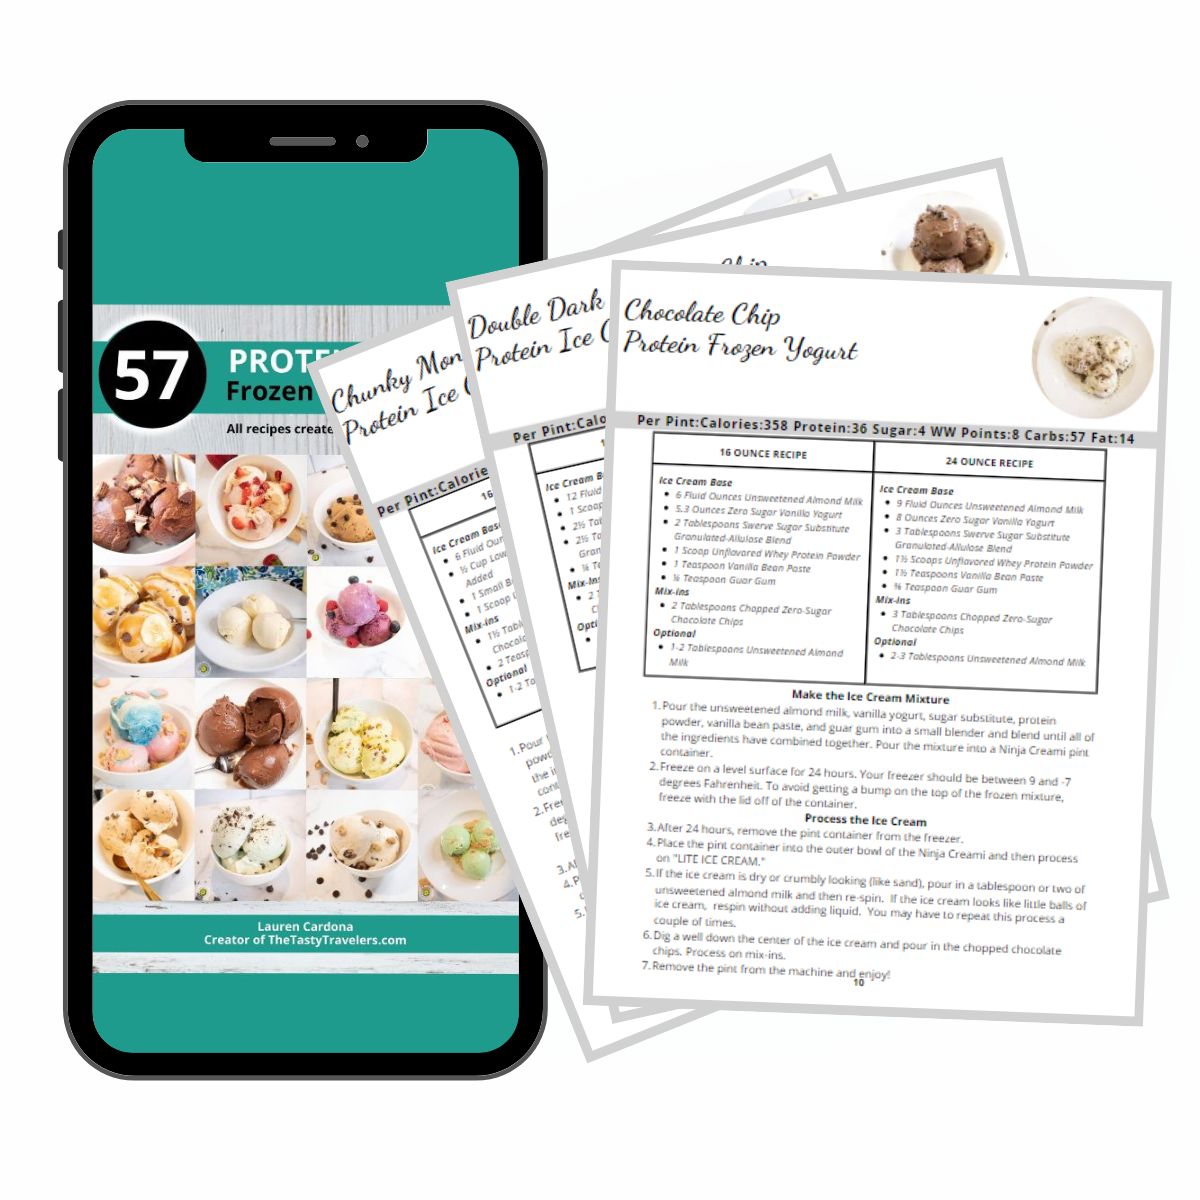 57 Protein Packed Ninja Creami Recipes-Print at Home Download